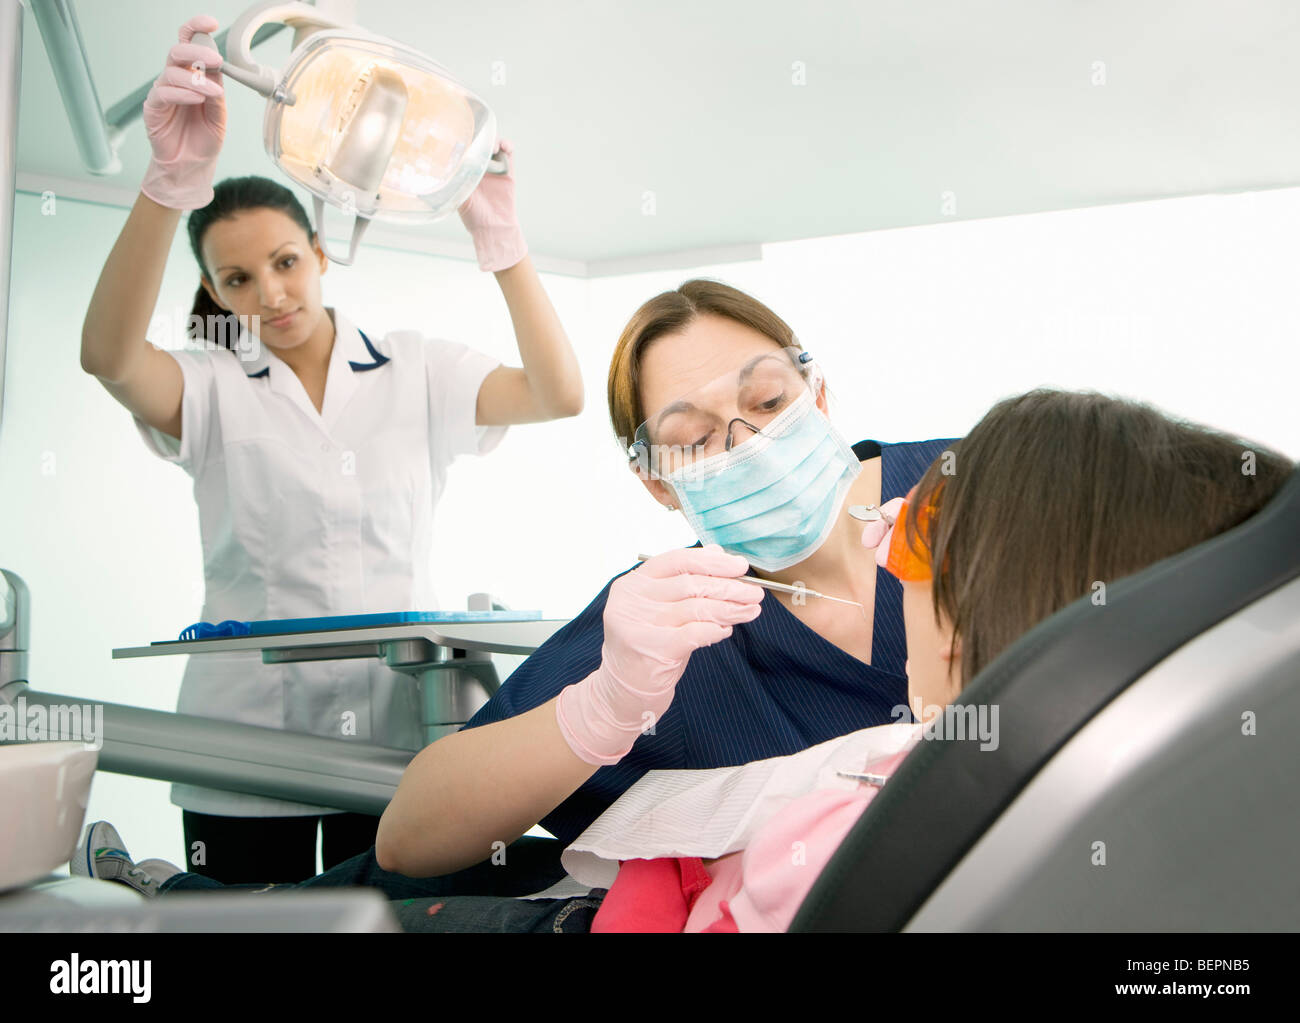 A dentist and nurse treating a patient Stock Photo